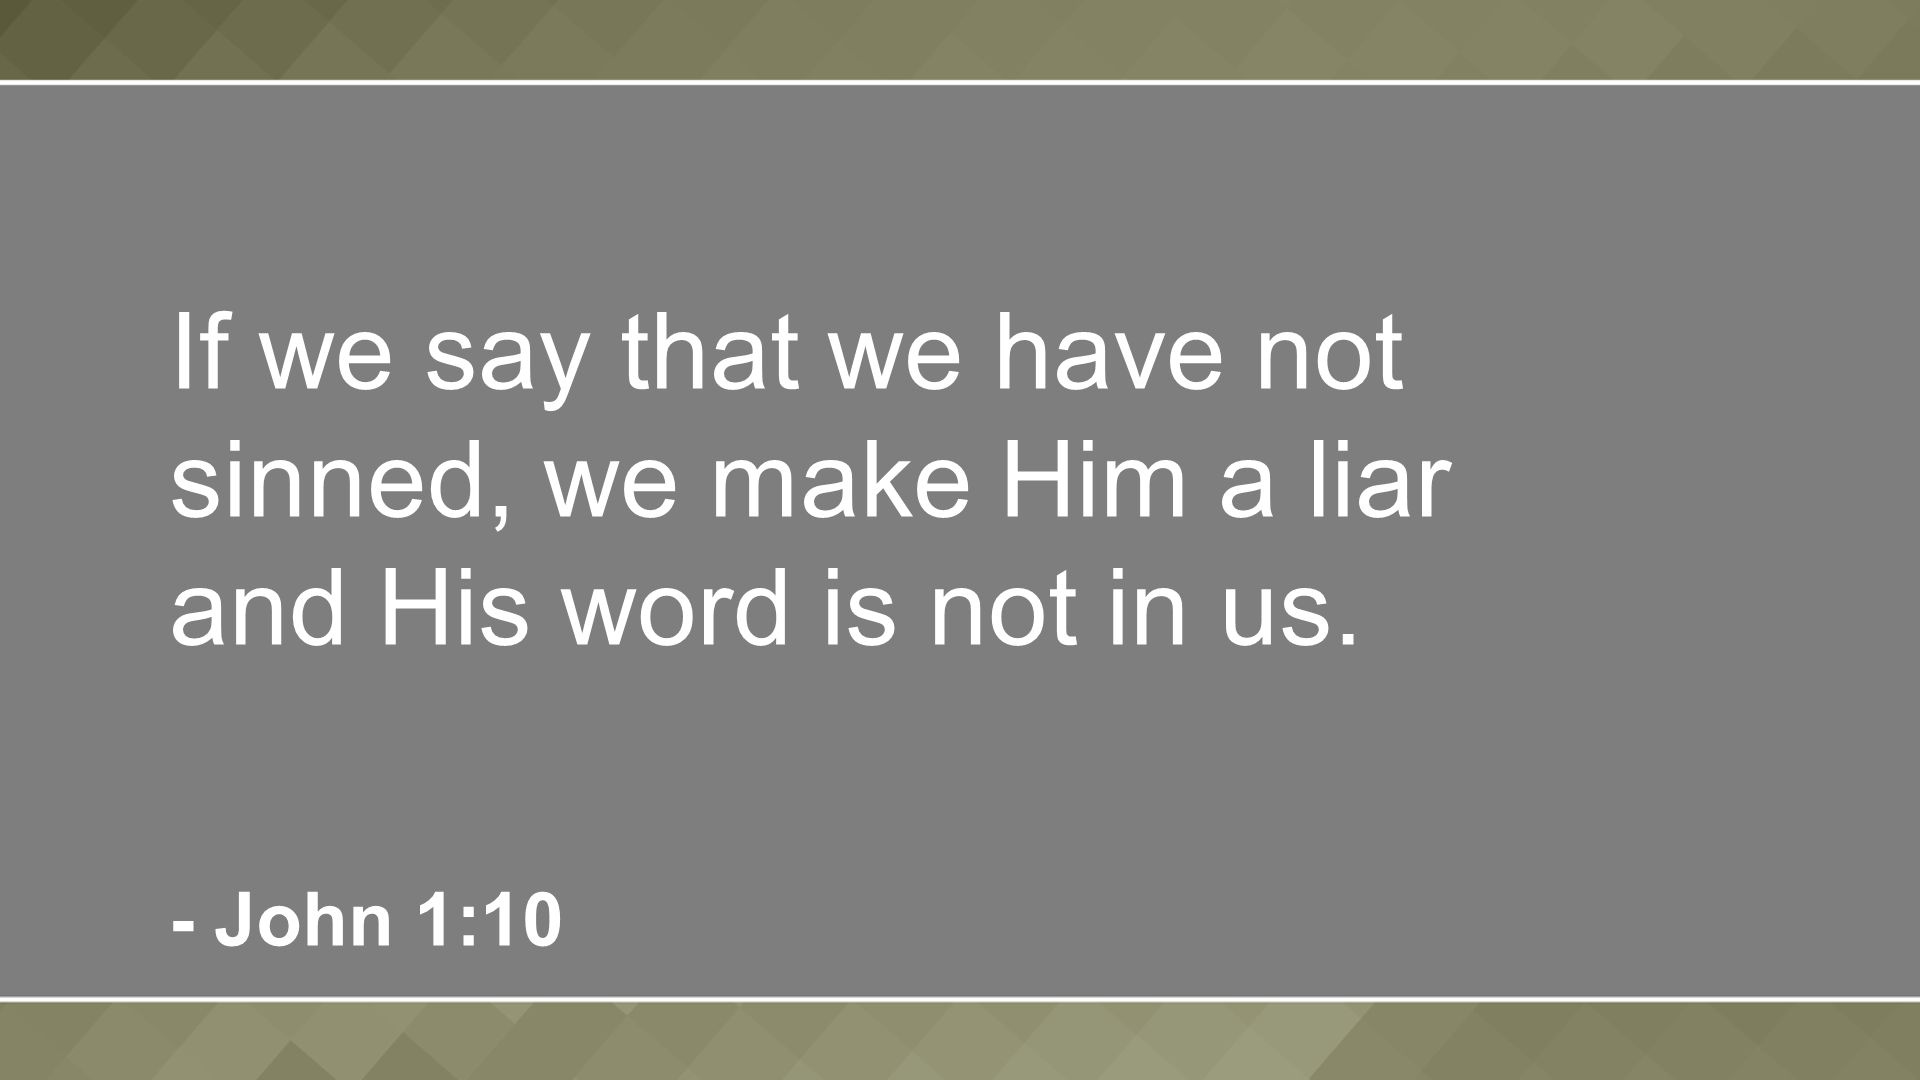 If we say that we have not sinned, we make Him a liar and His word is not in us. - John 1:10